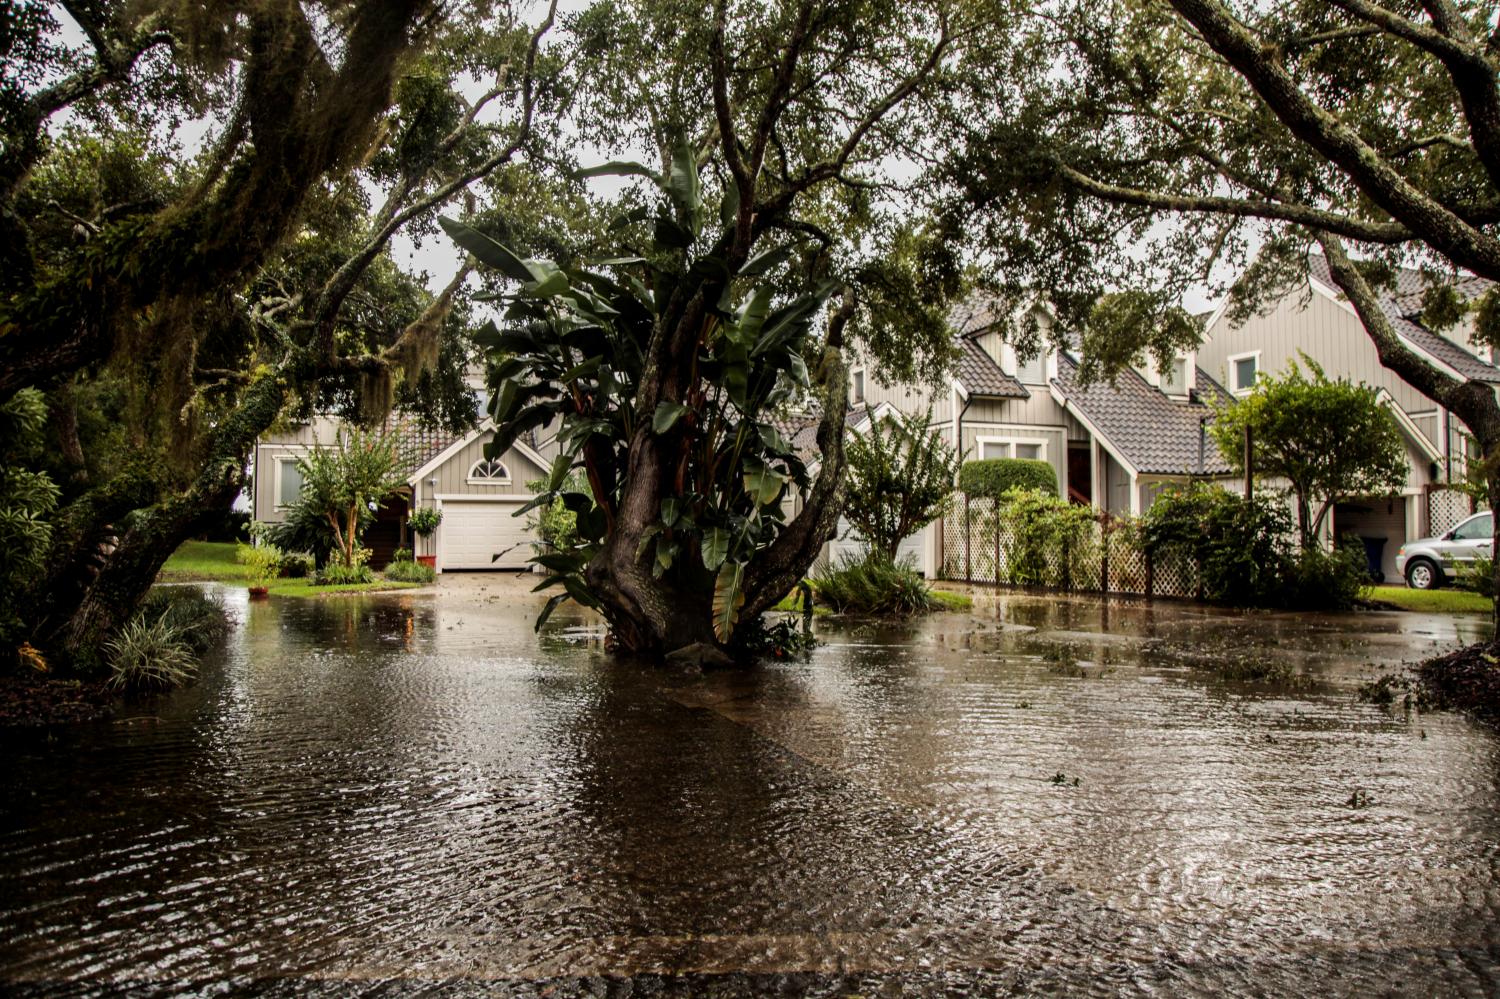 The area around houses is seen flooded due to Hurricane Dorian in St. Augustine, Florida, U.S., September 4, 2019. REUTERS/Maria Alejandra Cardona